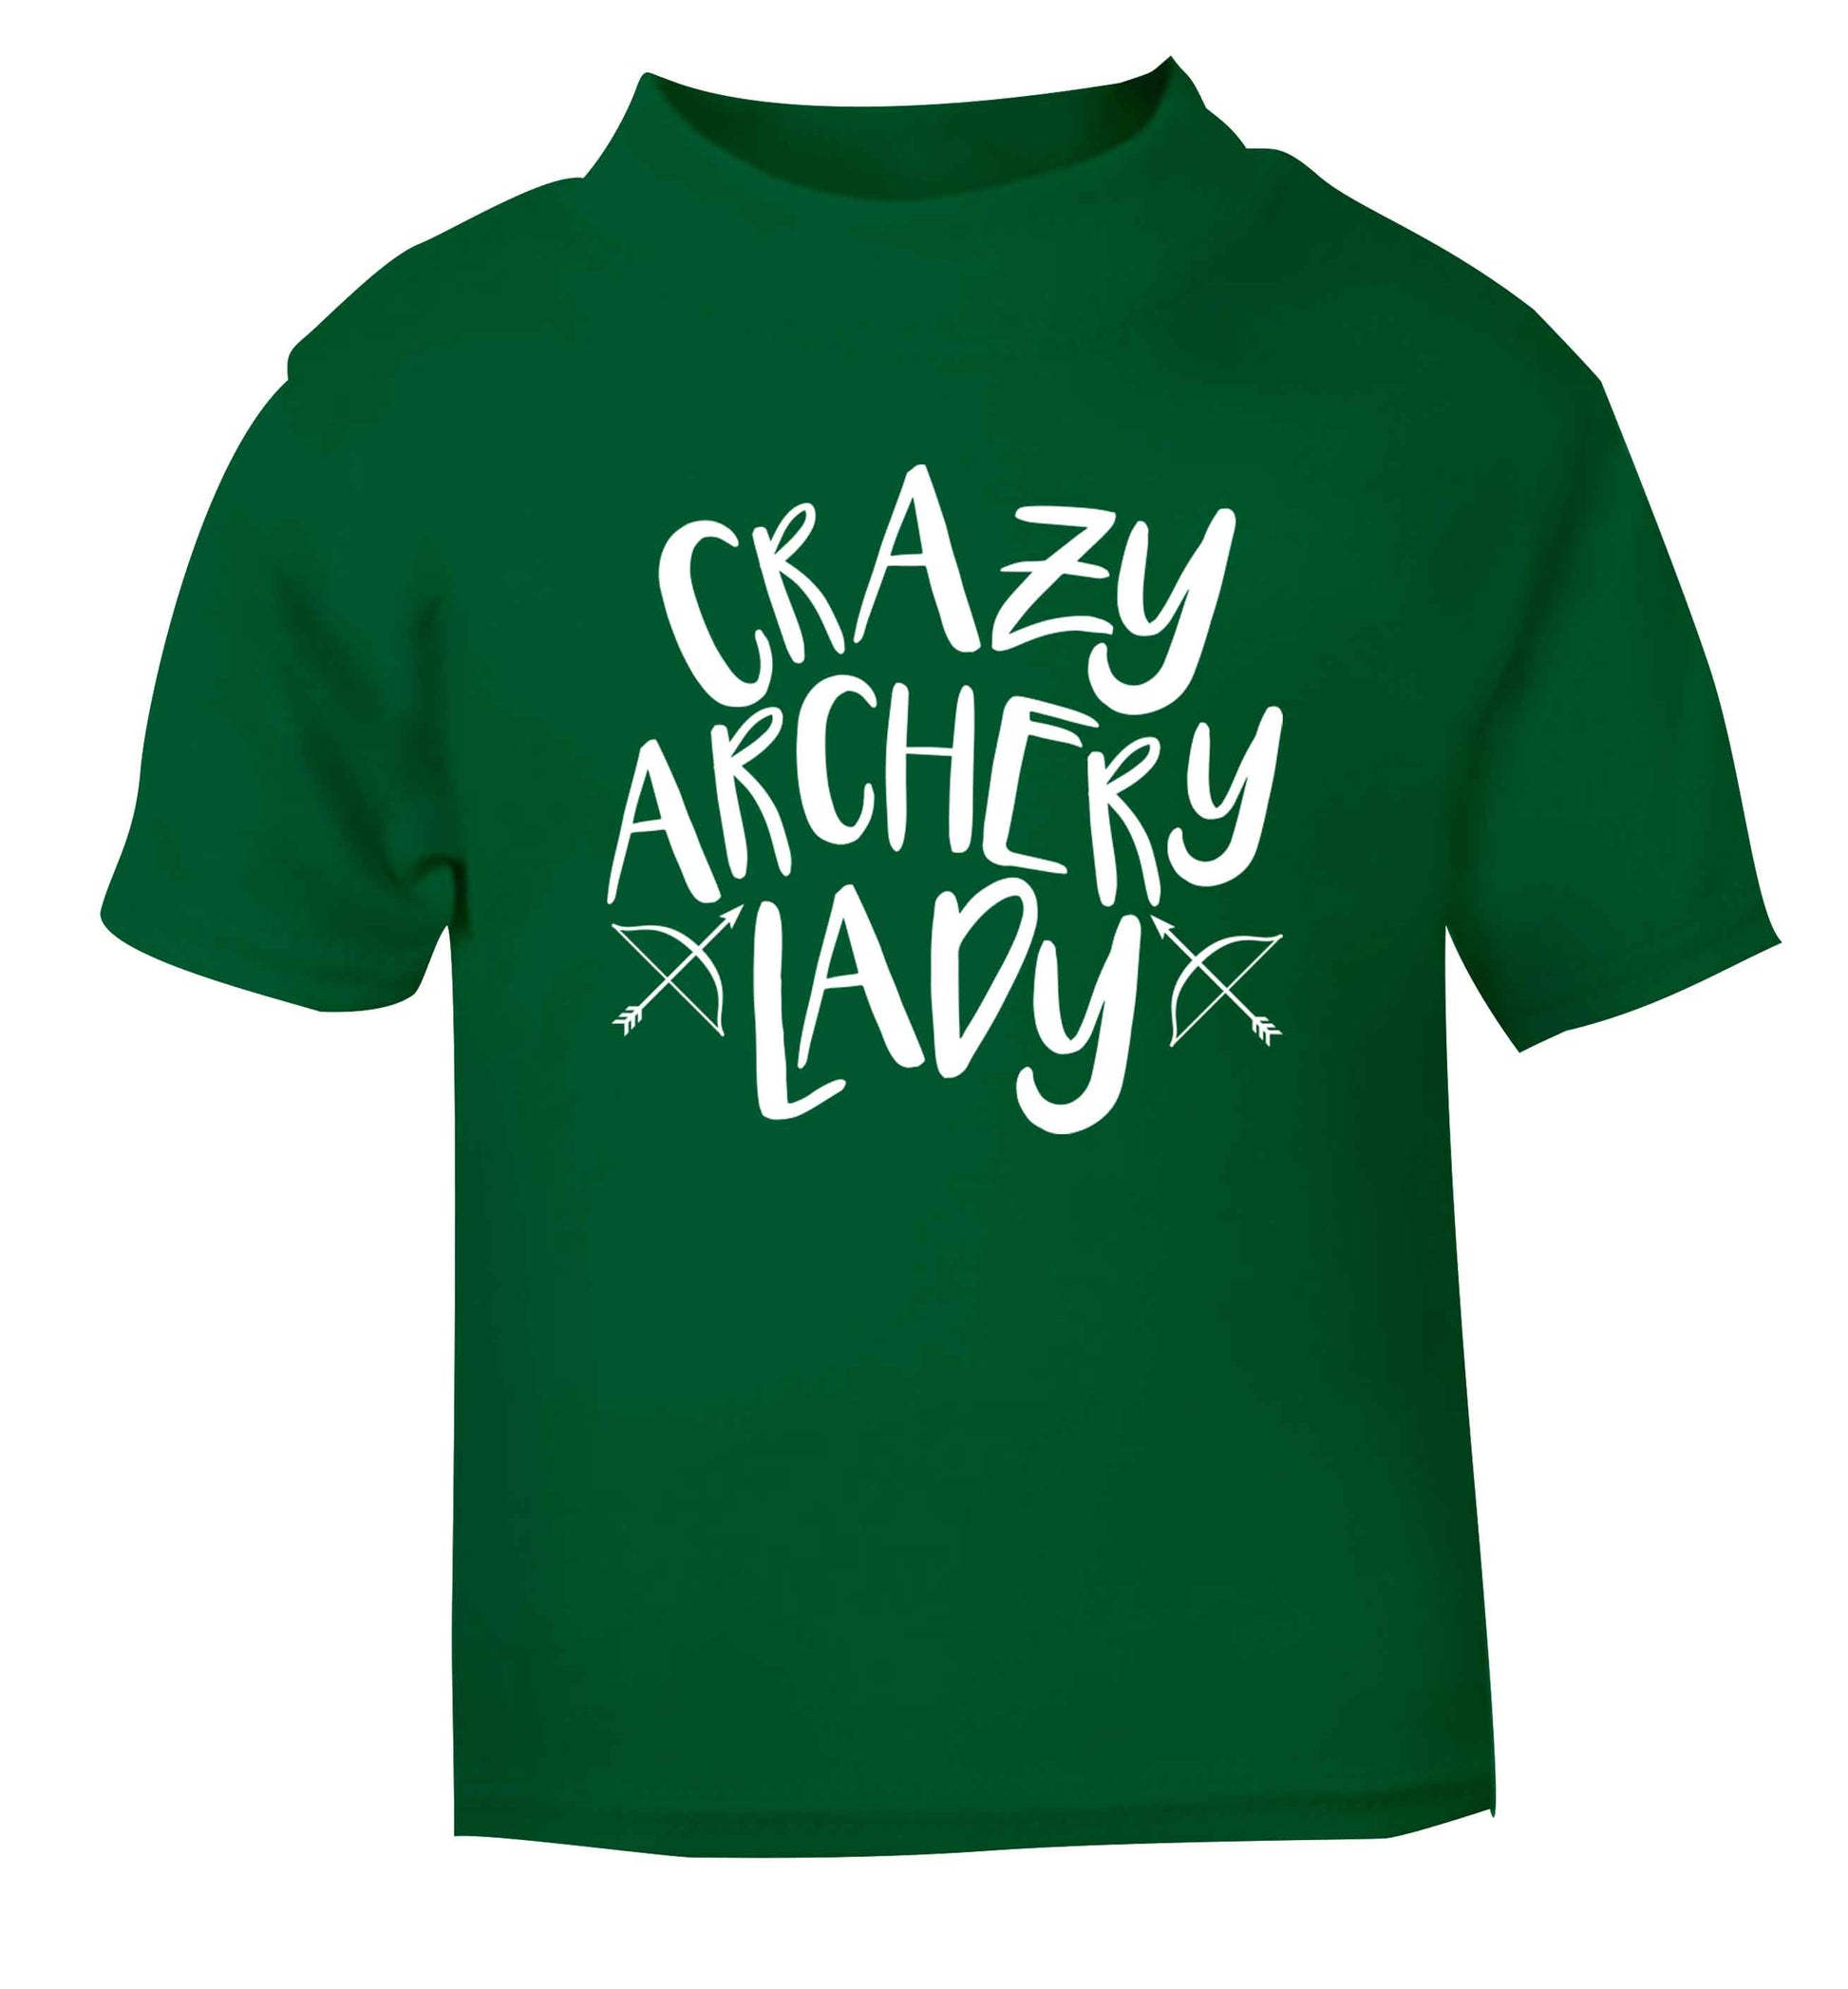 Crazy archery lady green Baby Toddler Tshirt 2 Years